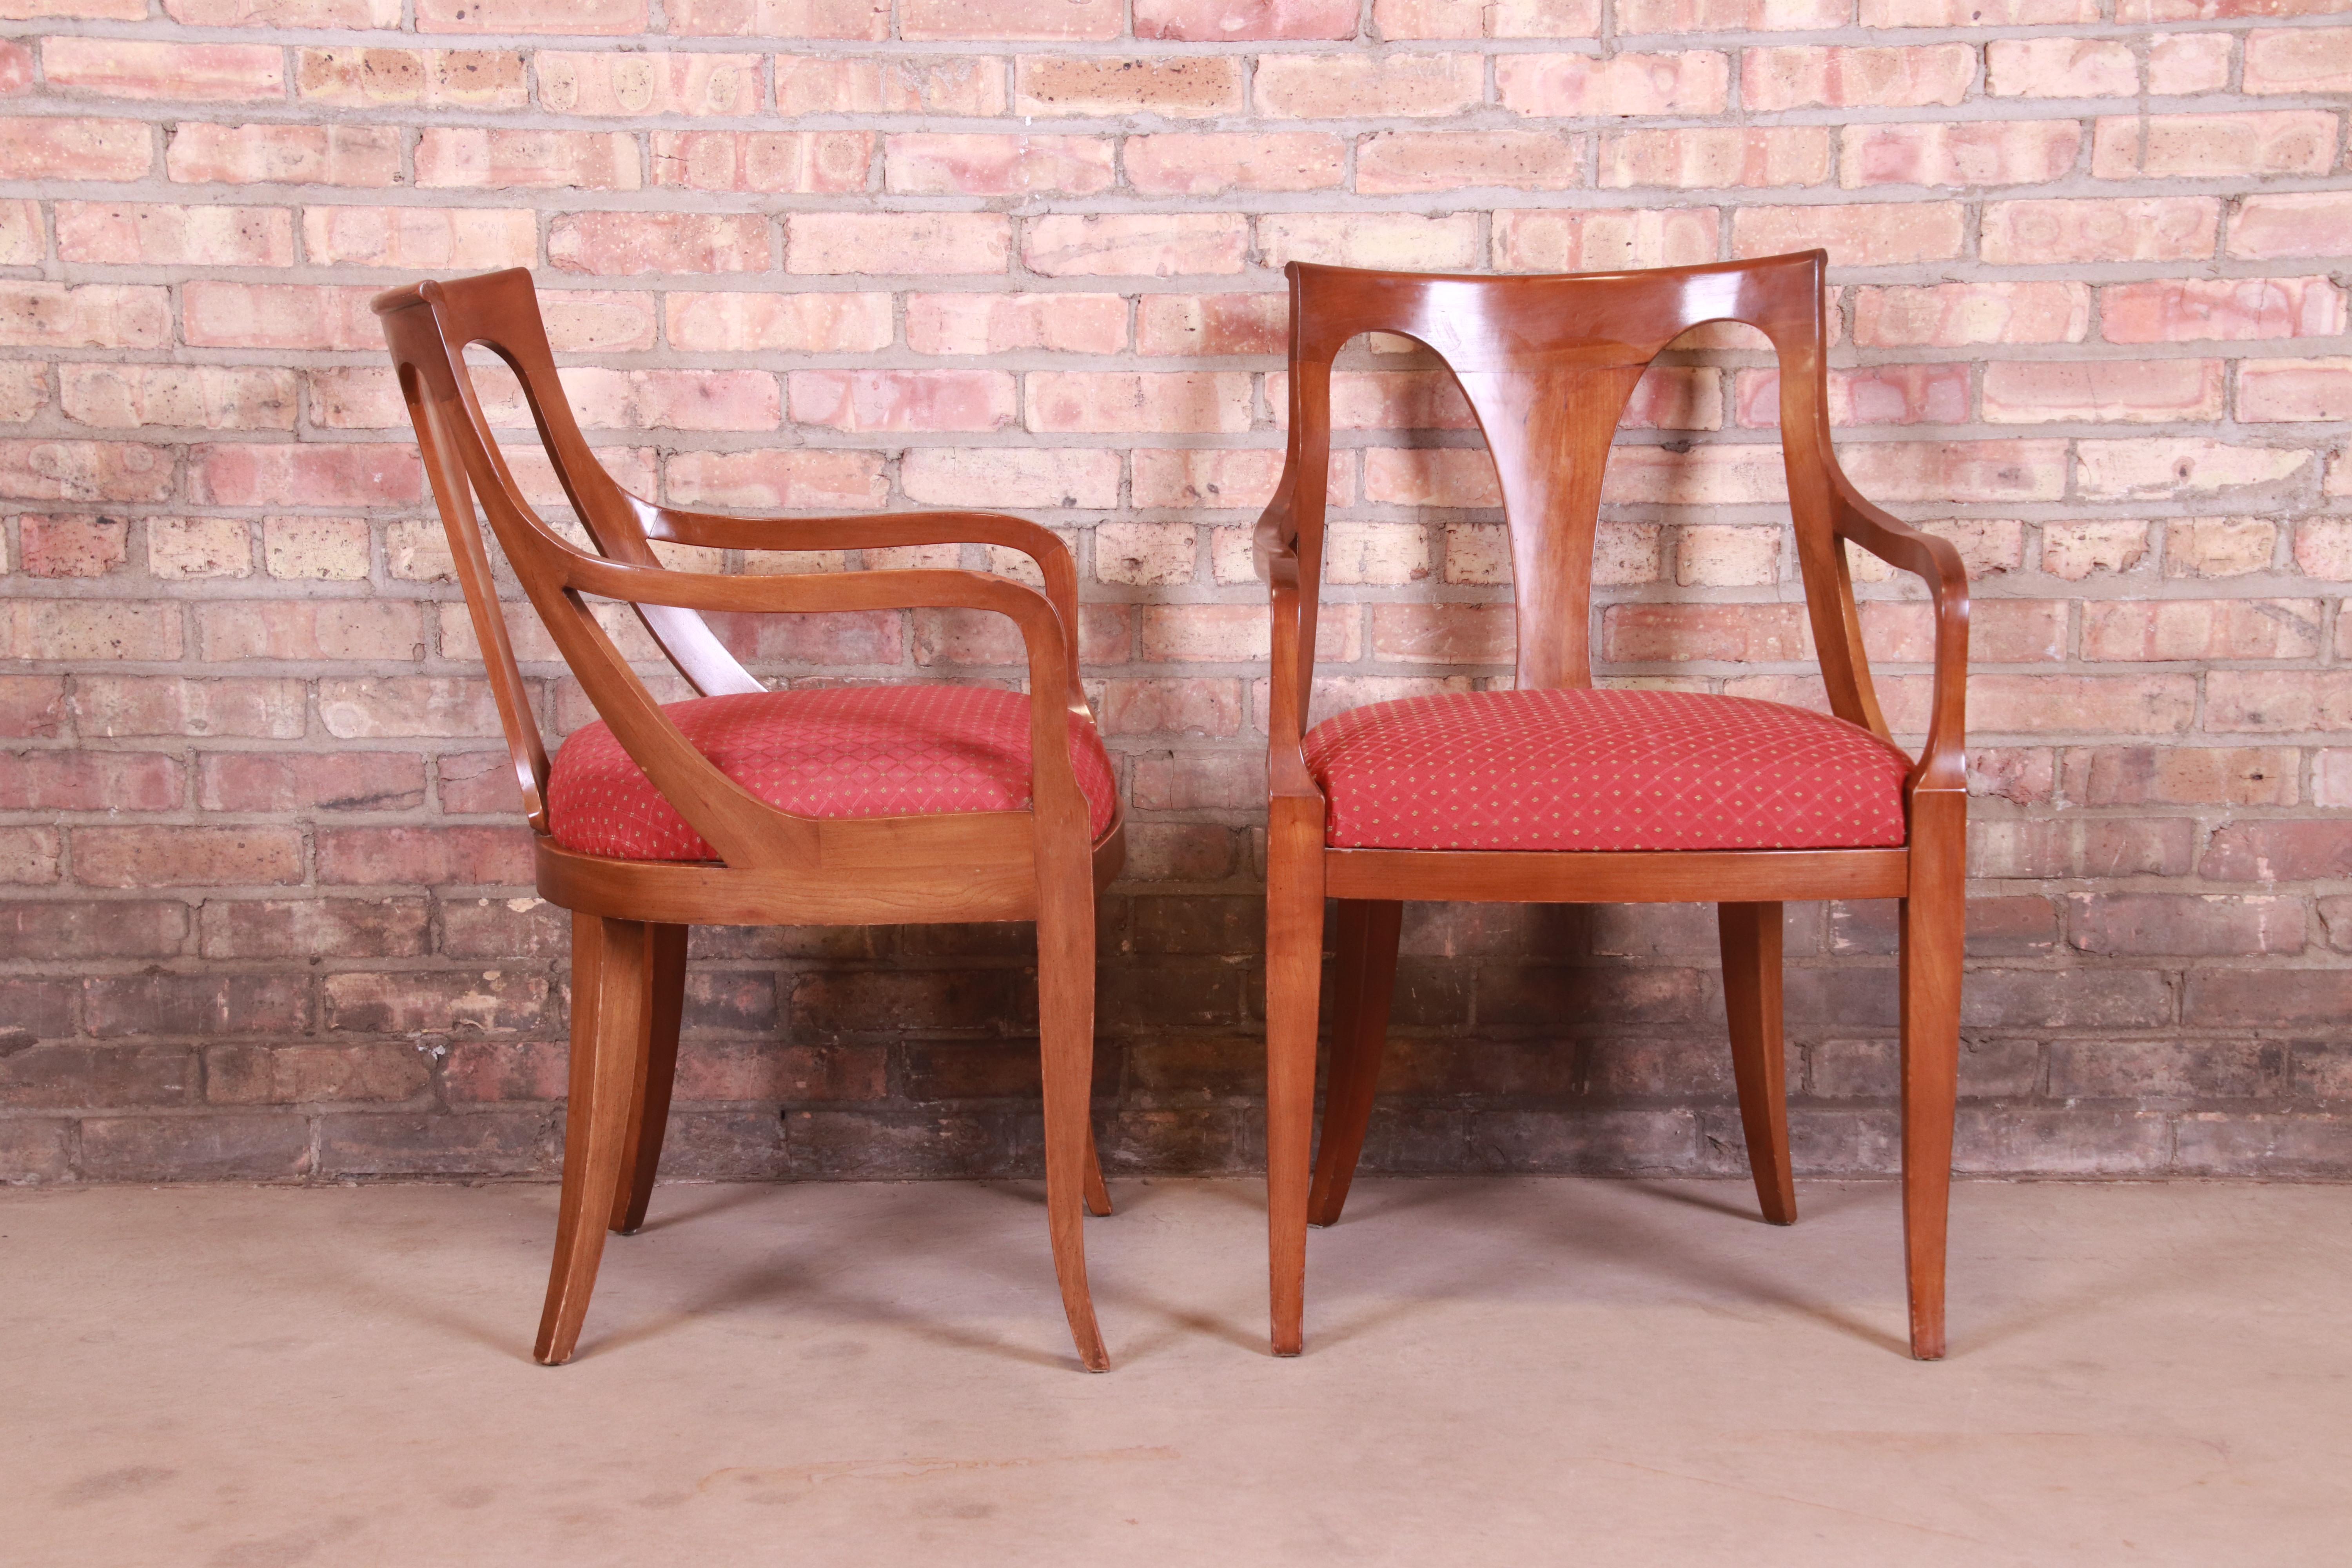 Kindel Furniture Regency Cherry Wood Dining Chairs, Set of Six 1